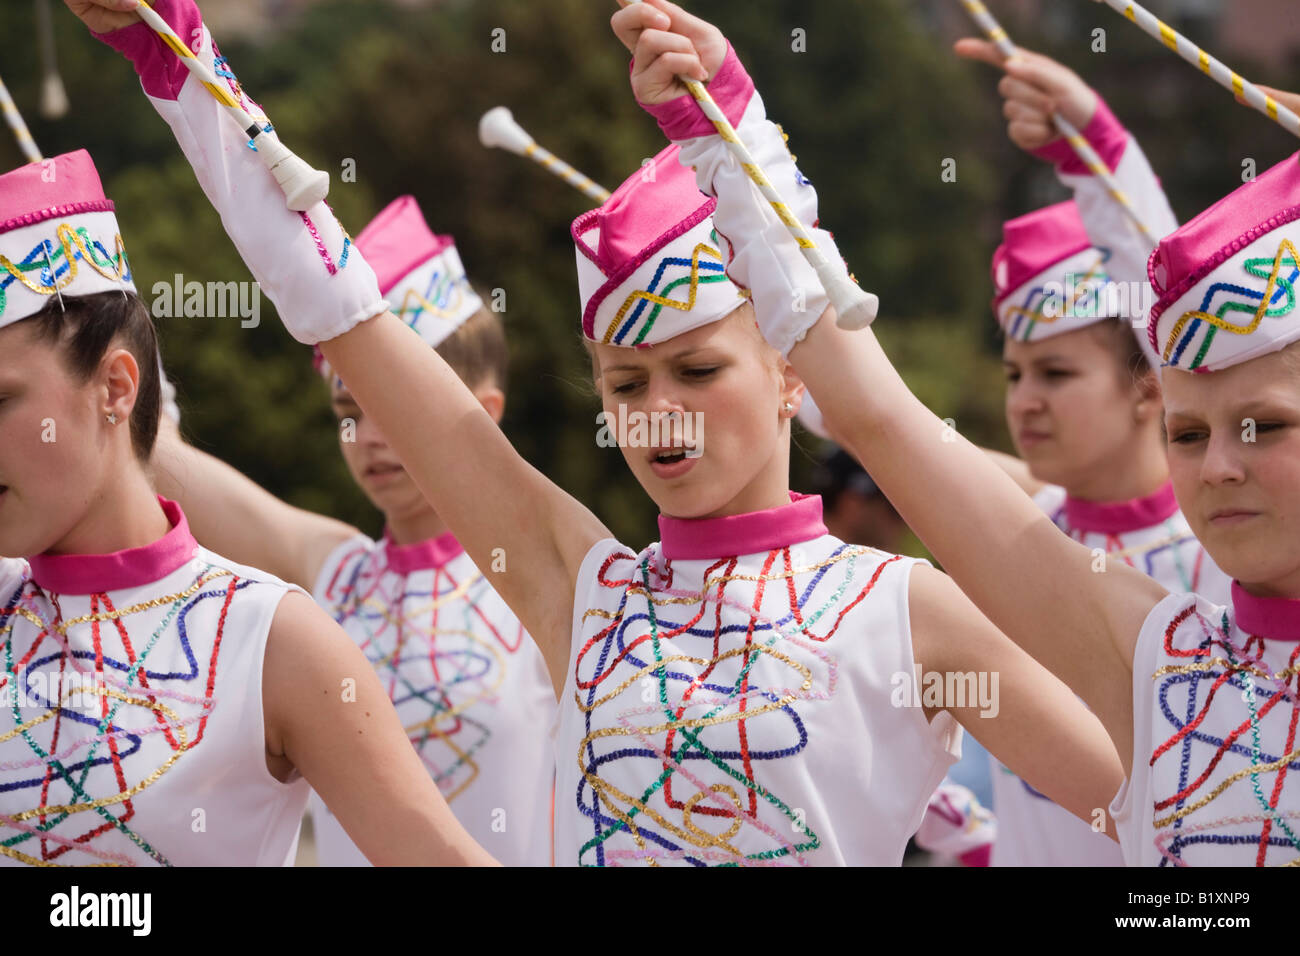 Majorette International Festival Grand Prix outdoor competition girls wearing white outfit Croatia Europe Stock Photo